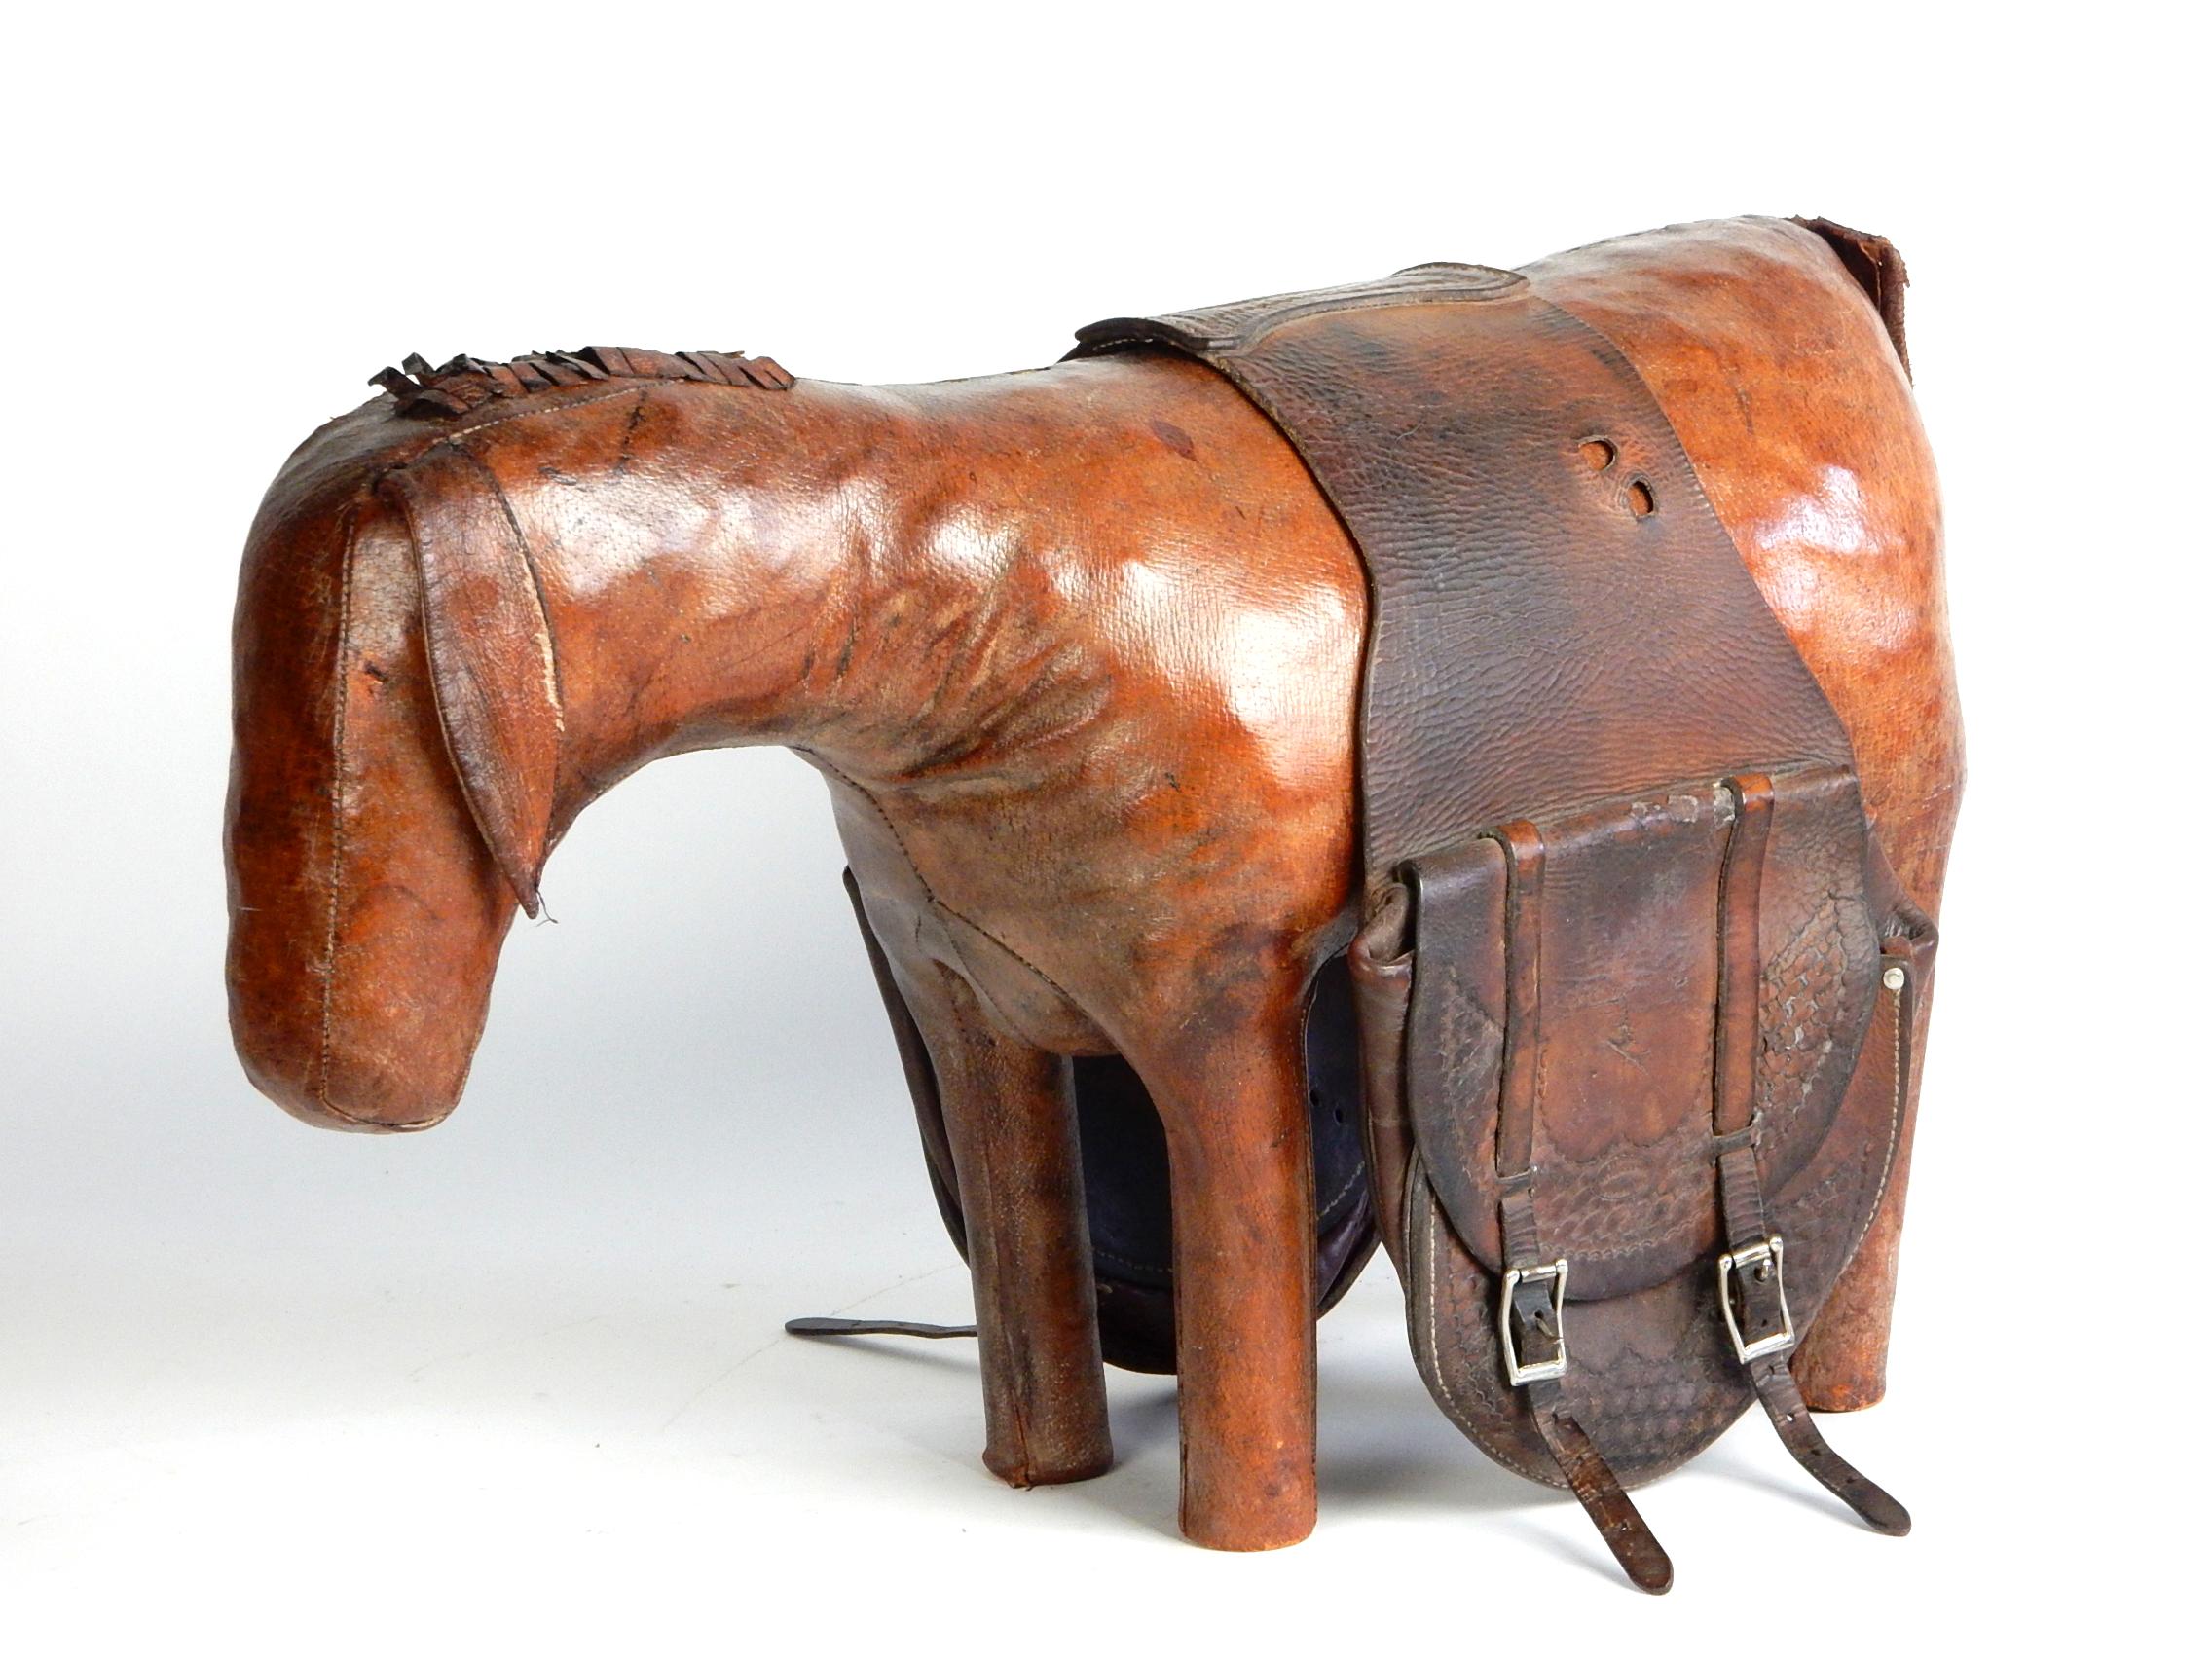 Whimsical handstitched leather burro ottoman by Dimitri Omersa.
As found with small vintage saddlebags added making him a functional piece of art
to store stuff in (bags not attached).
All parts such as tail, ears and mane are in place. Eyes are